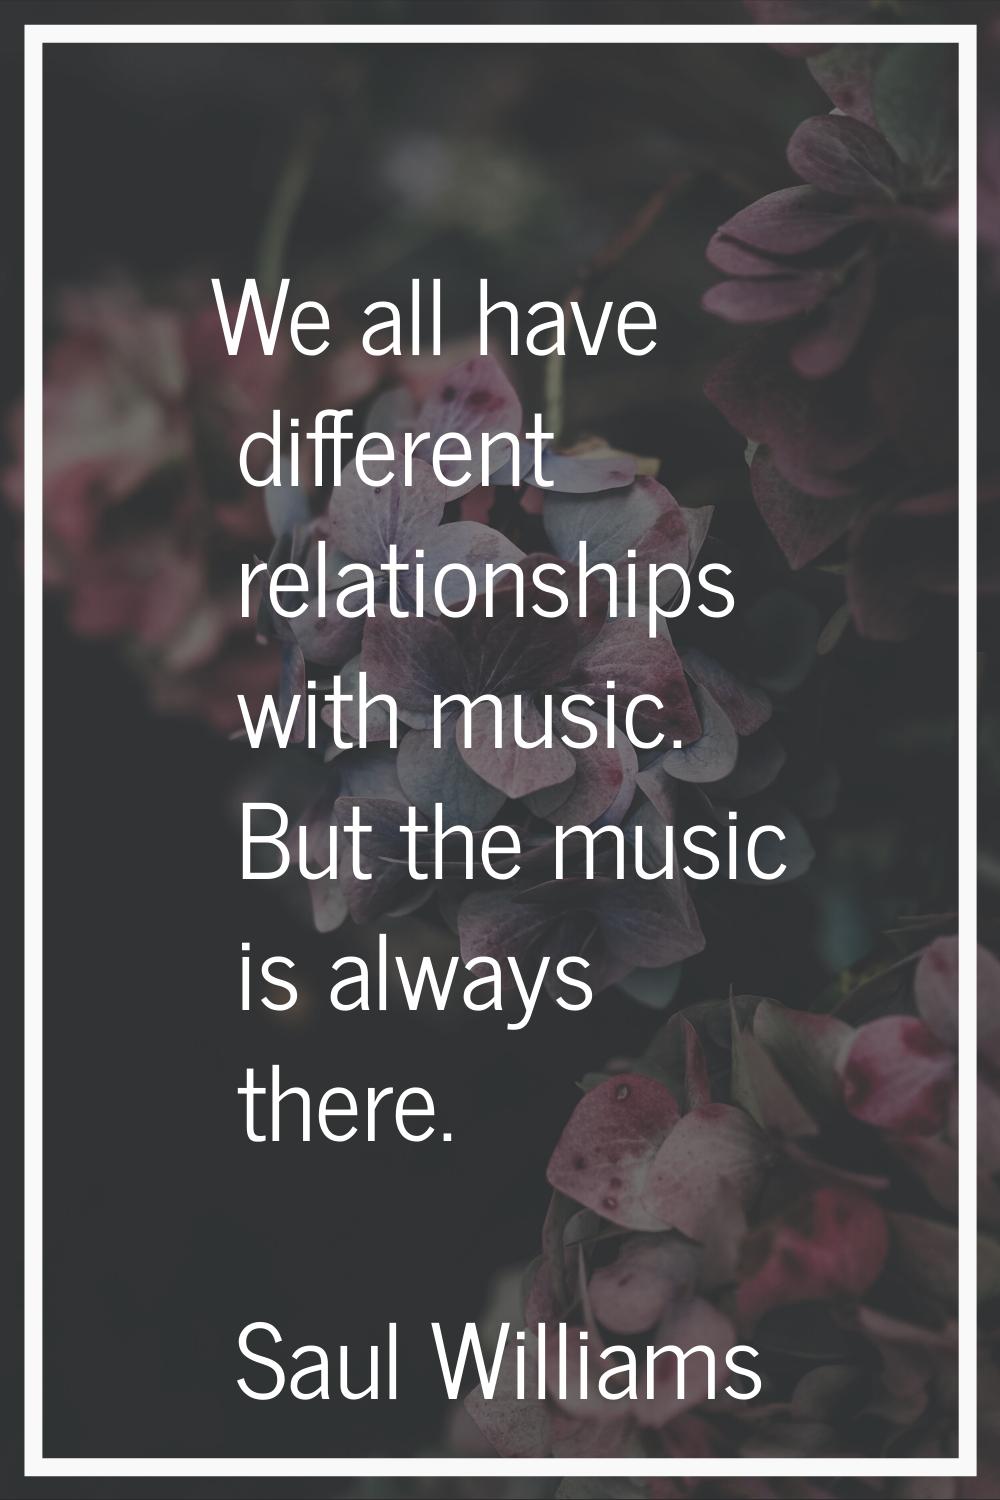 We all have different relationships with music. But the music is always there.